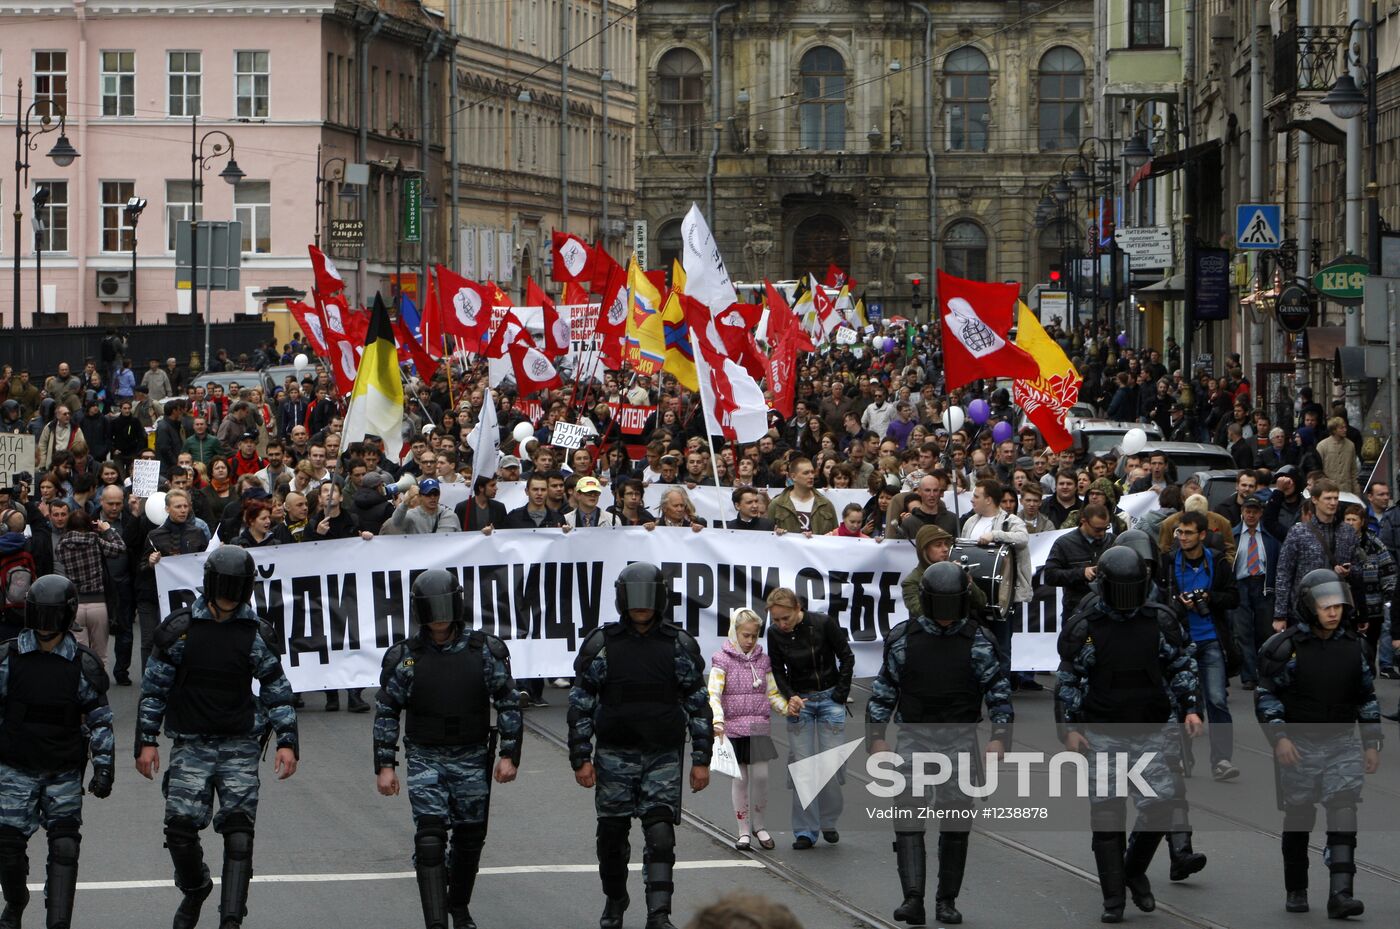 Opposition rally in St Petersburg